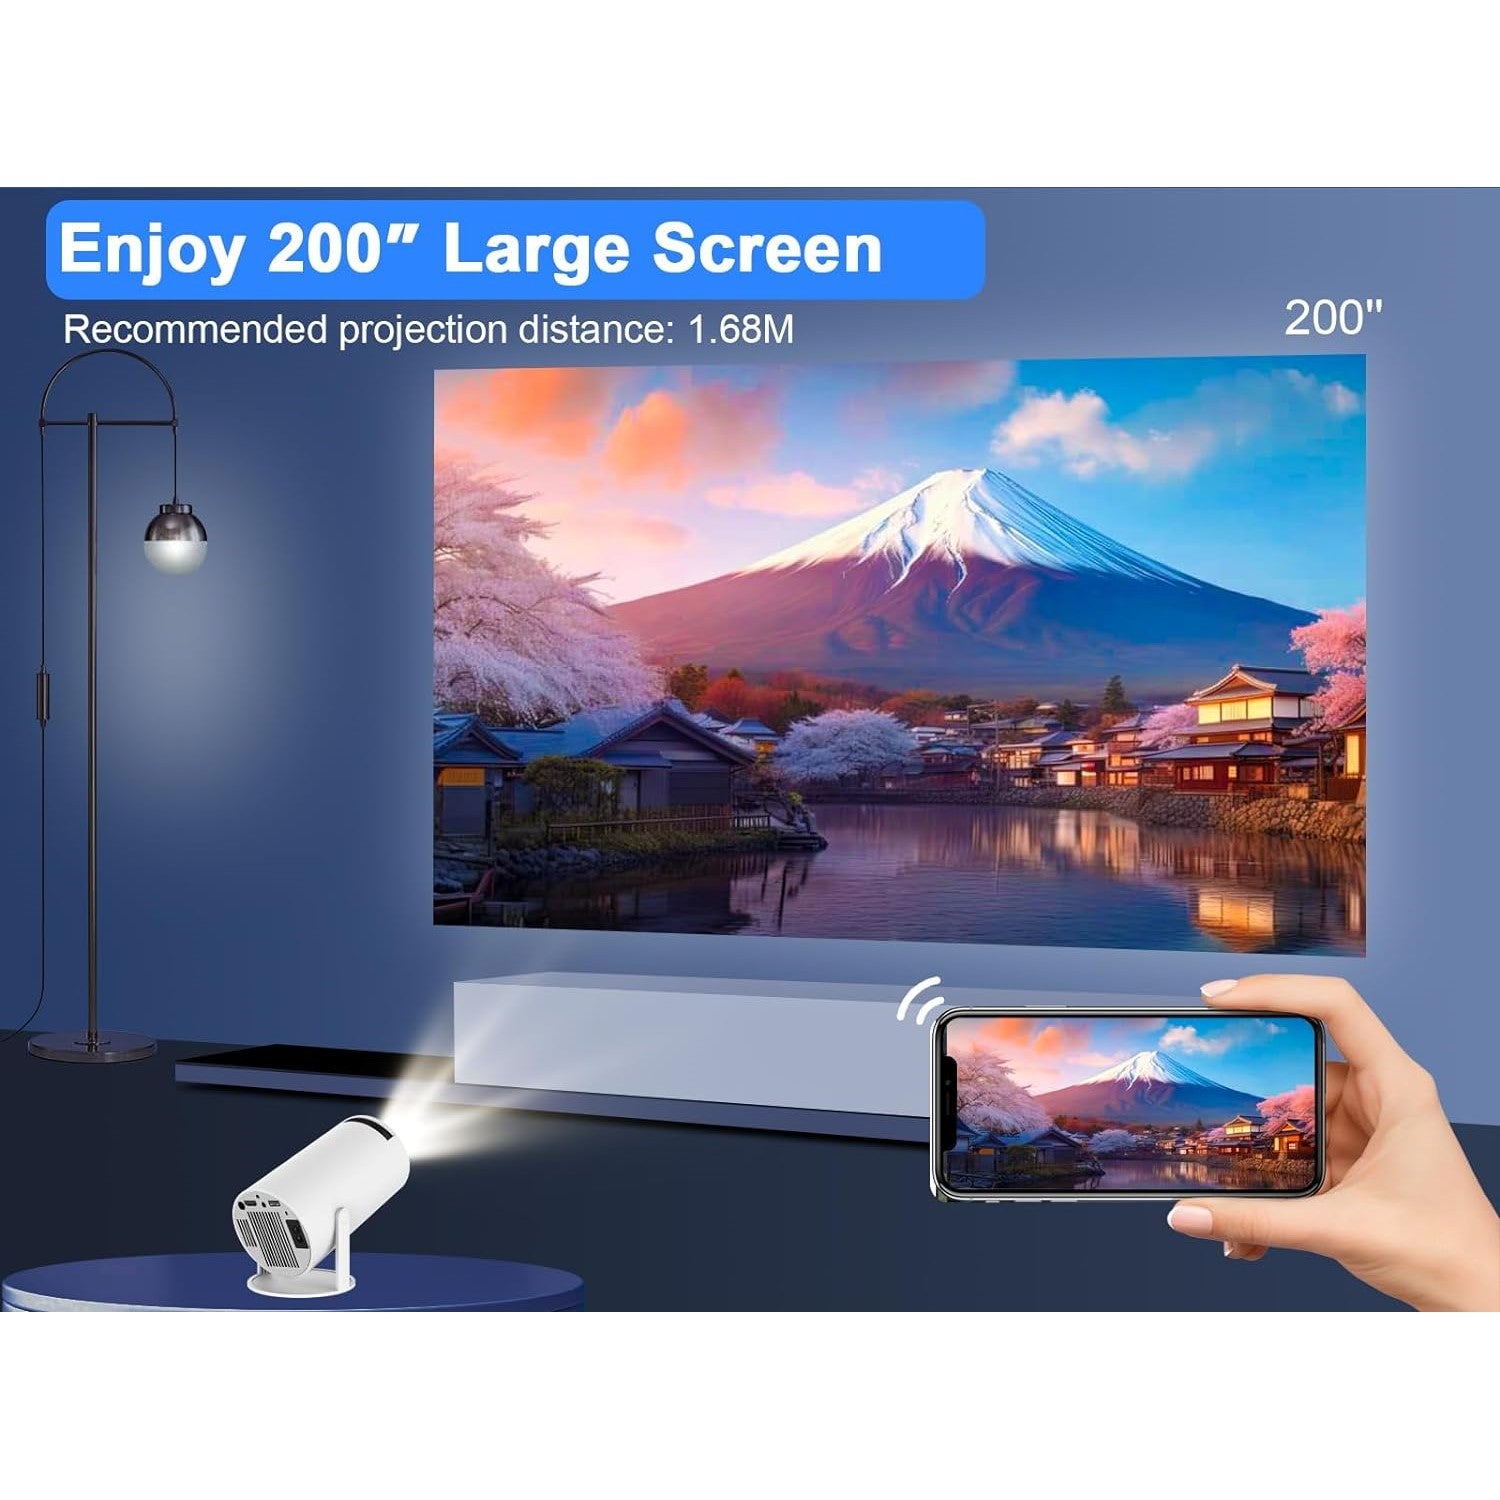 Magcubic HY300 Portable 4K Projector - WiFi6, Android 11, Bluetooth 5.0 - Ultra-Sharp Imaging, Smart Connectivity, Superior Audio